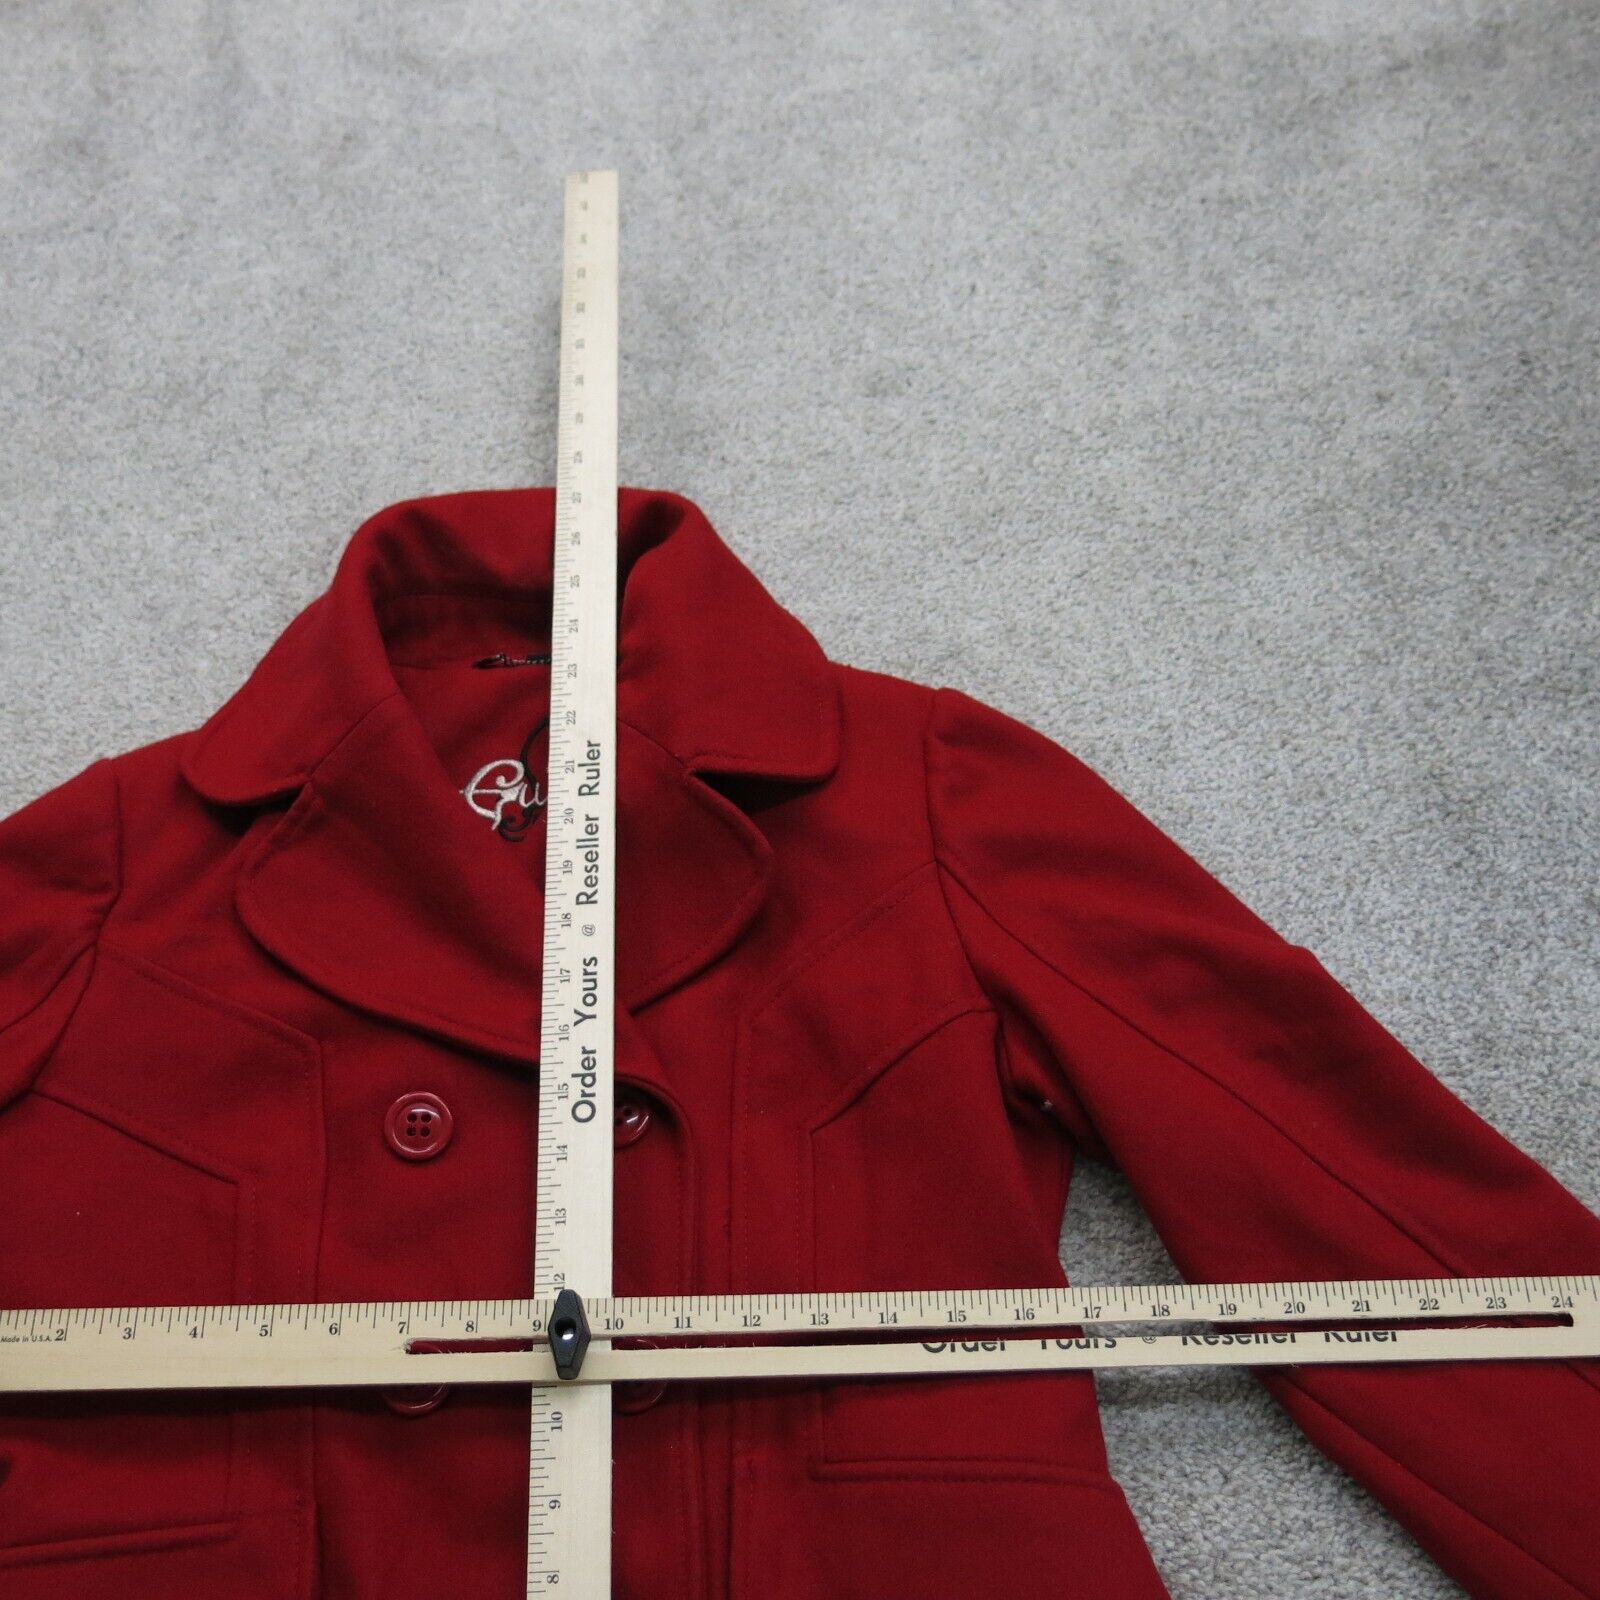 Vintage Womens Pea Coat Jacket Double Breasted Long Sleeves Red